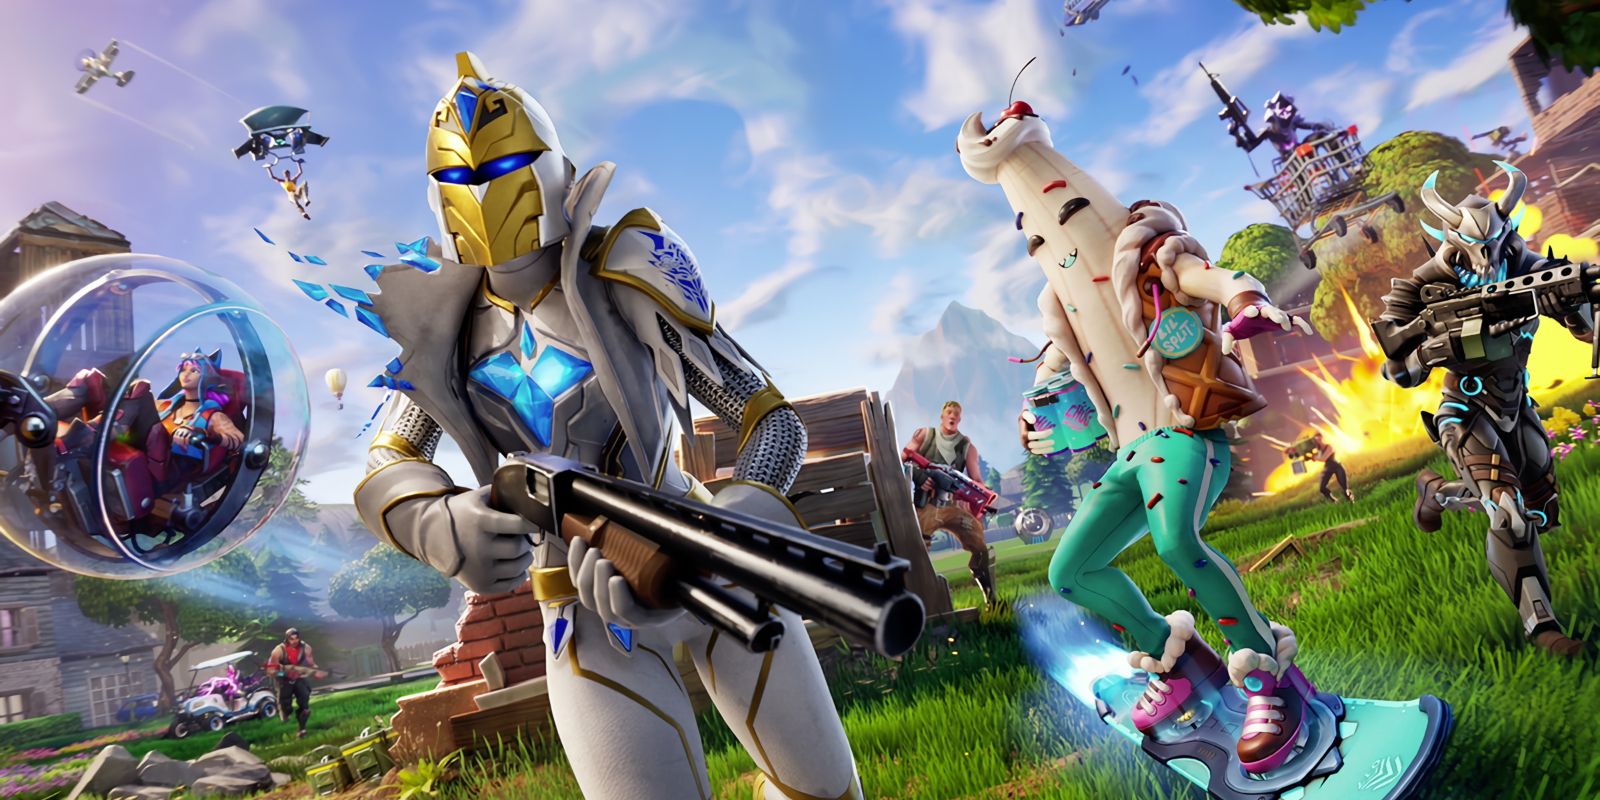 A Fortnite character in fantasy magic armor carries a shotgun next to one wearing a banana skin on a hoverboard.